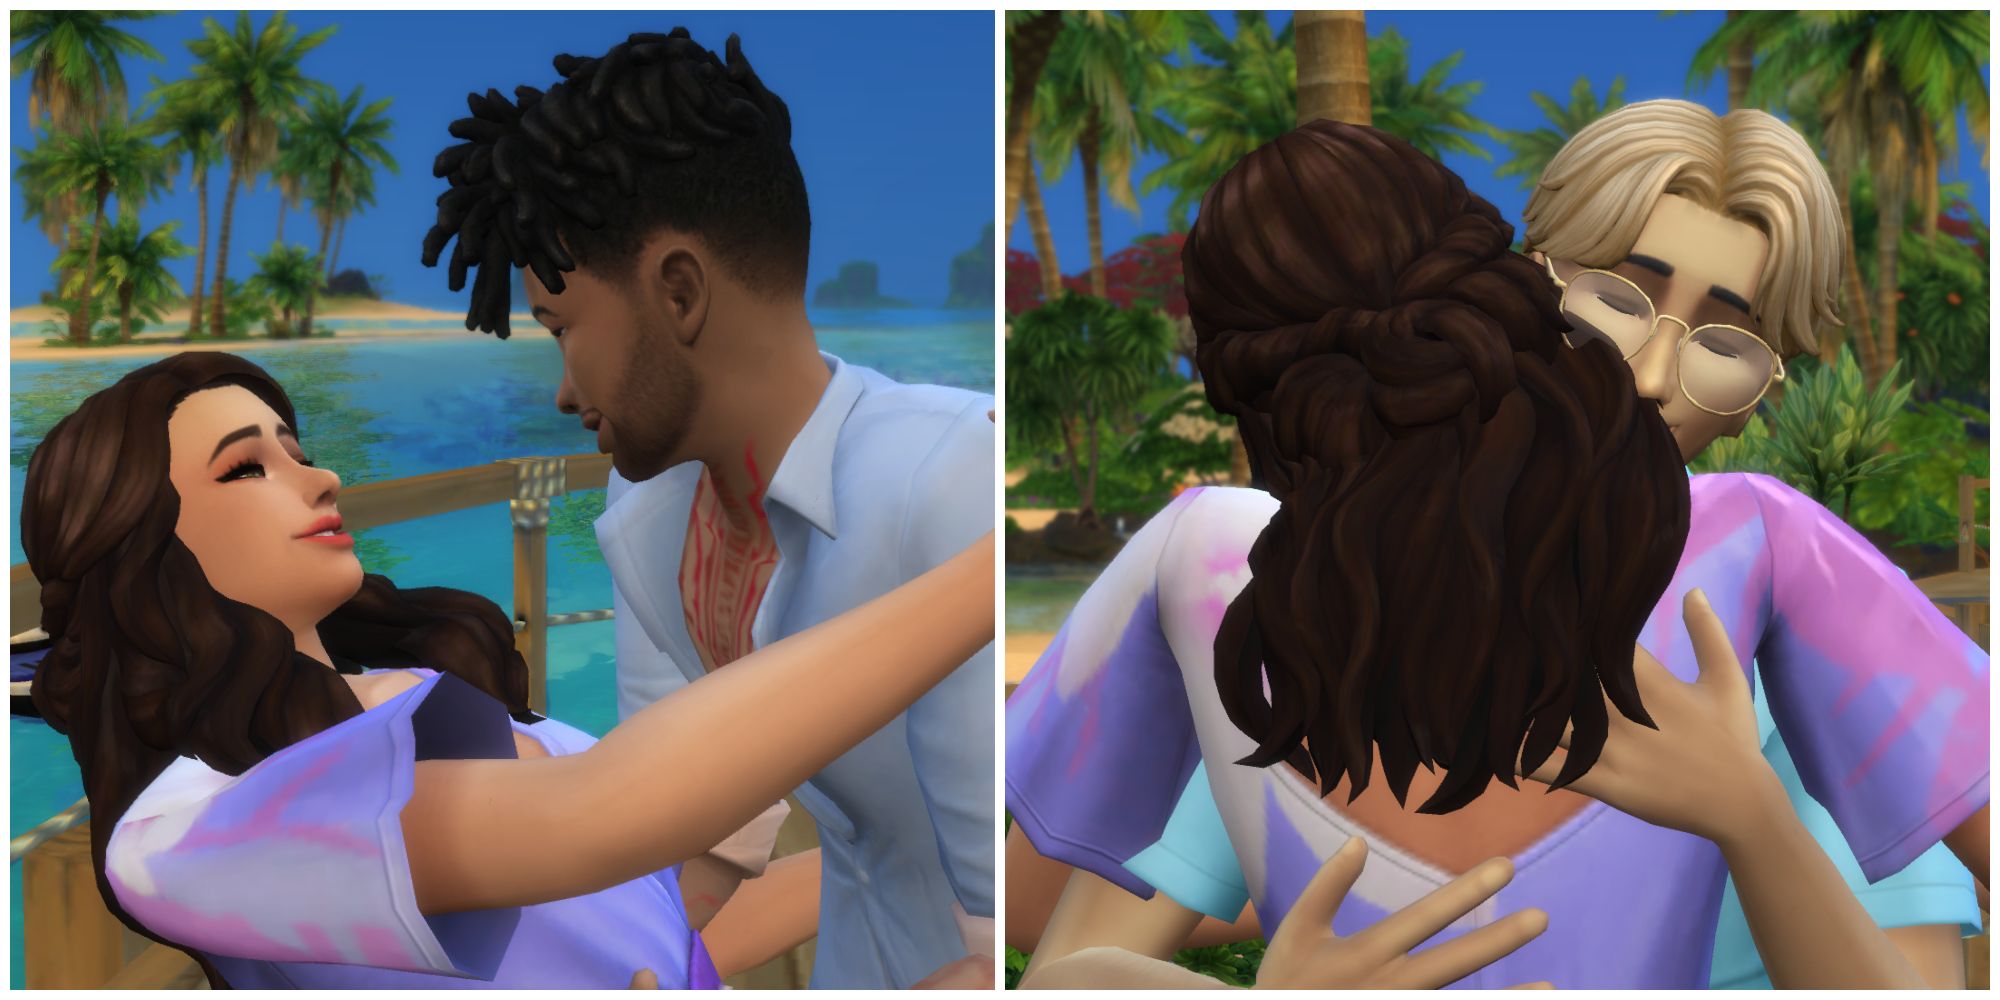 A contestant must decide on the guy she'd like to couple up with for the Love Island reality tv challenge for The Sims 4